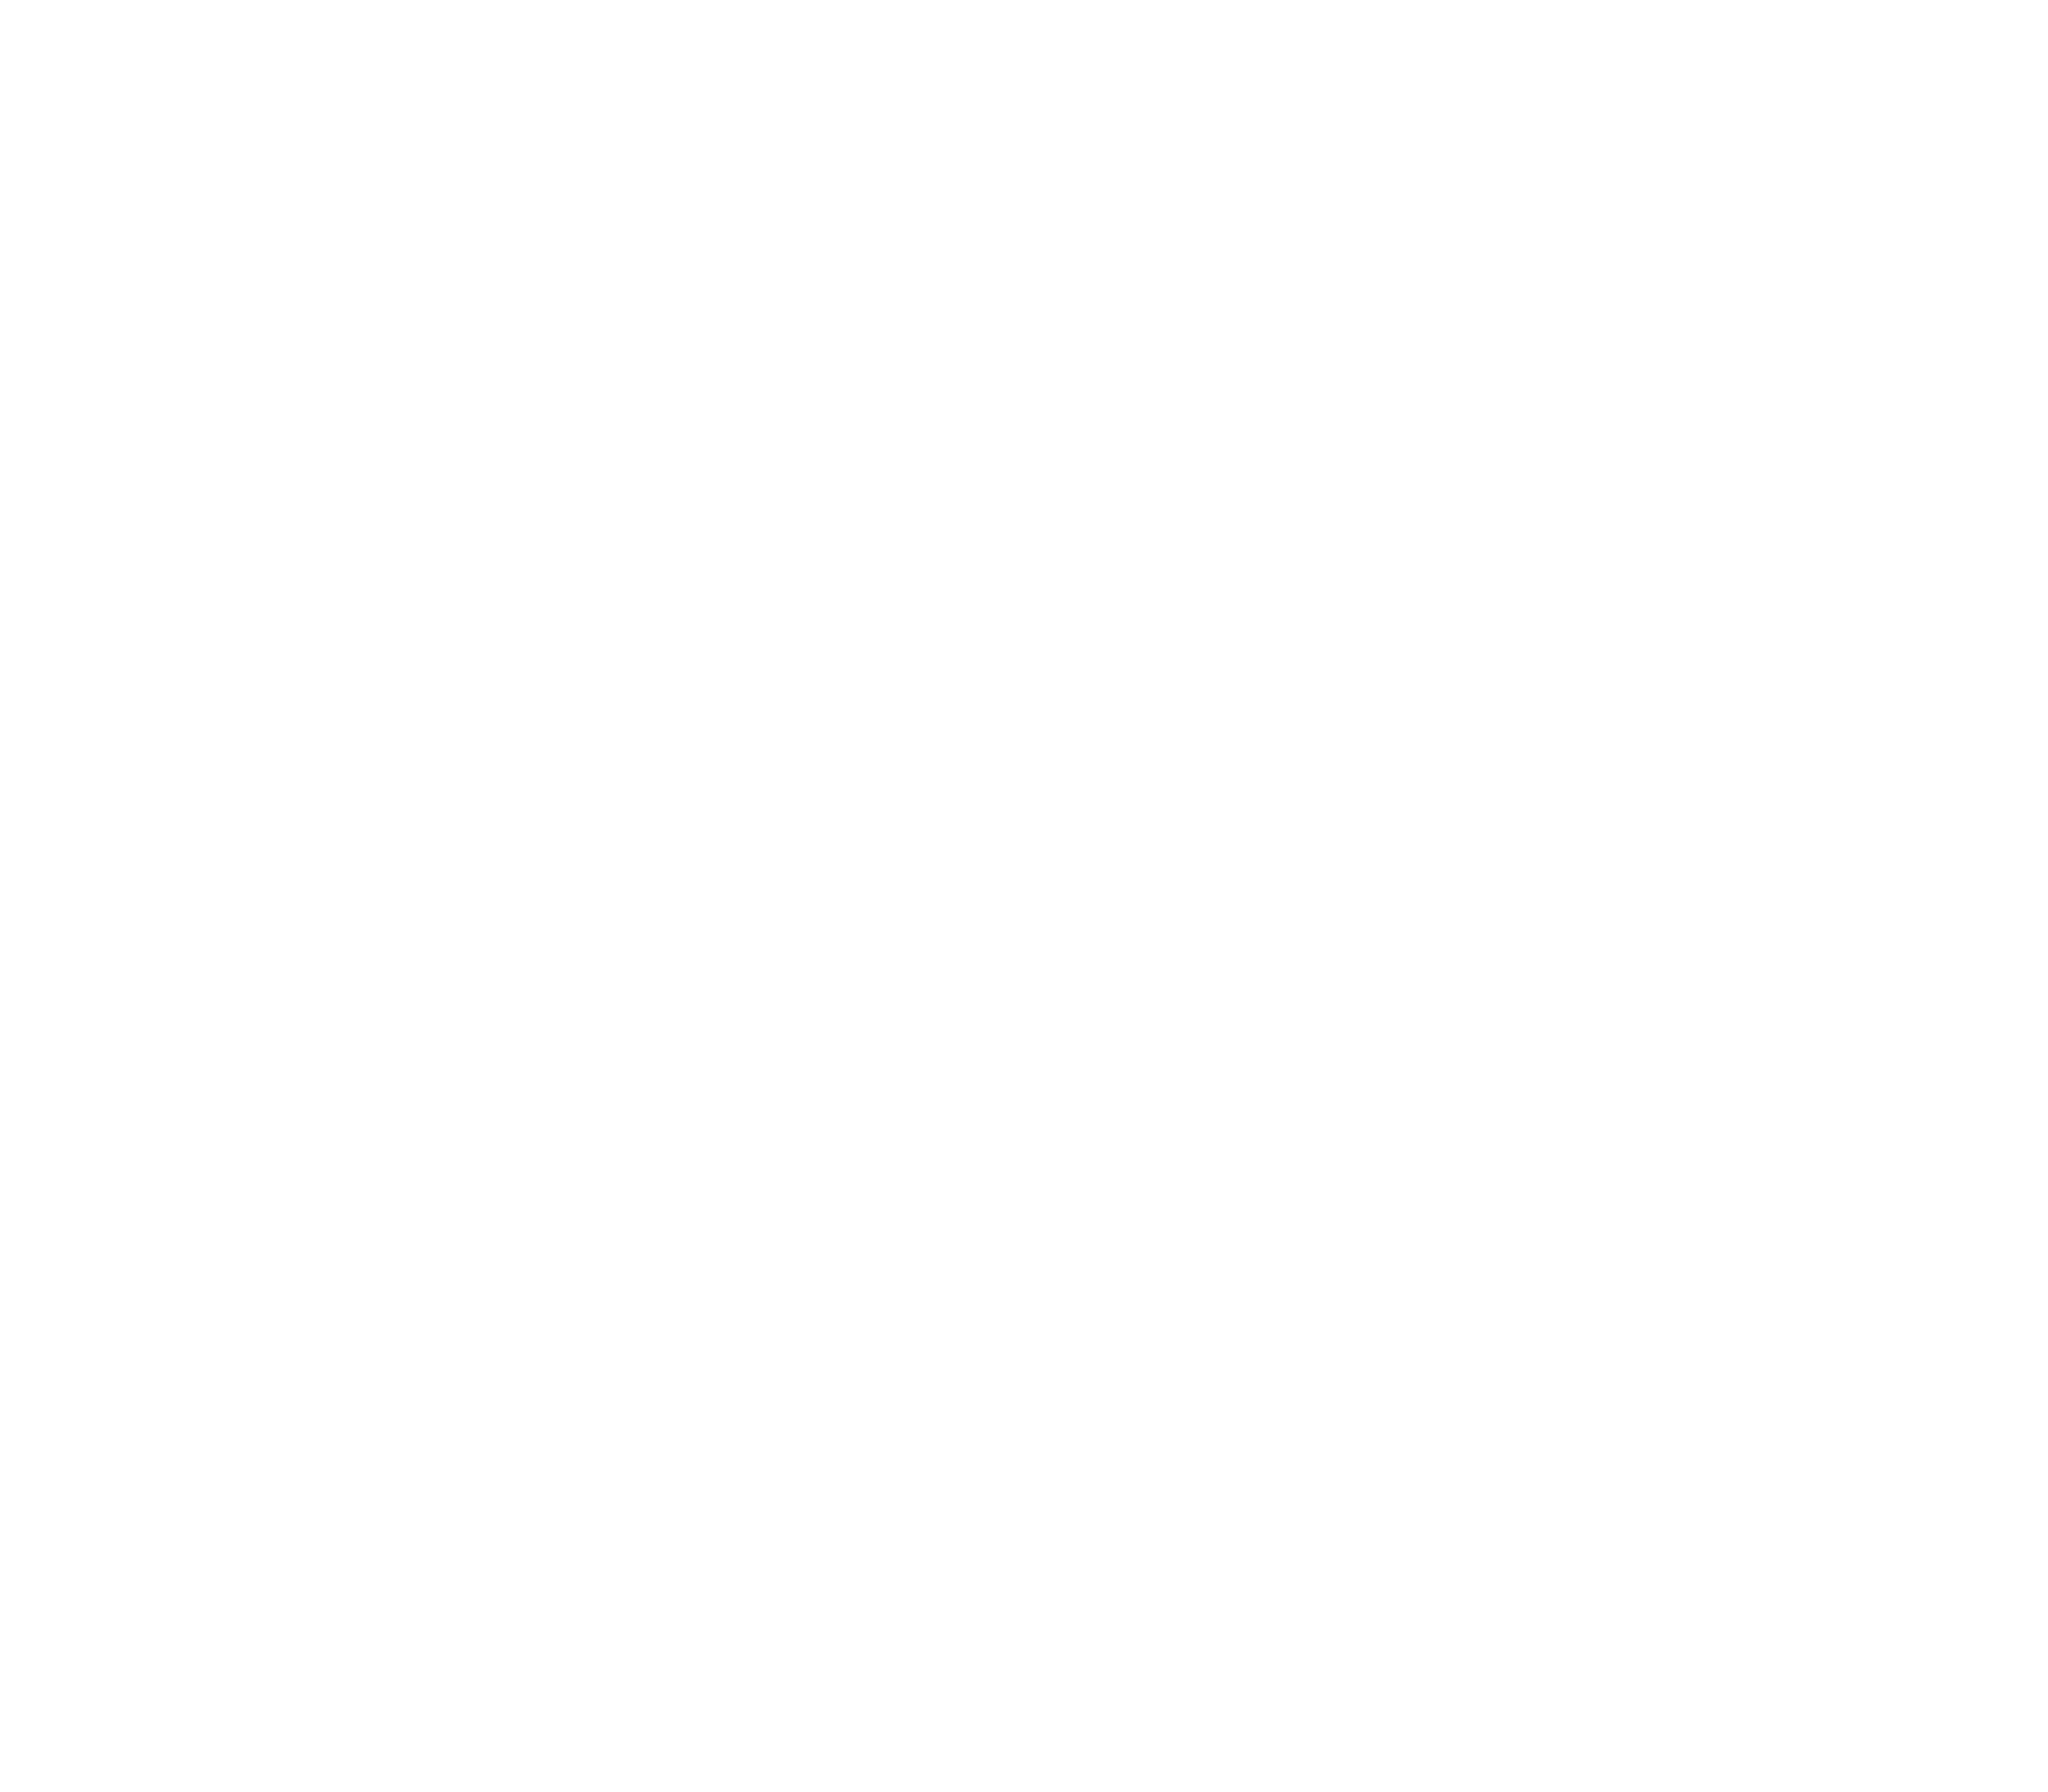 Box Icon About New Direction Support